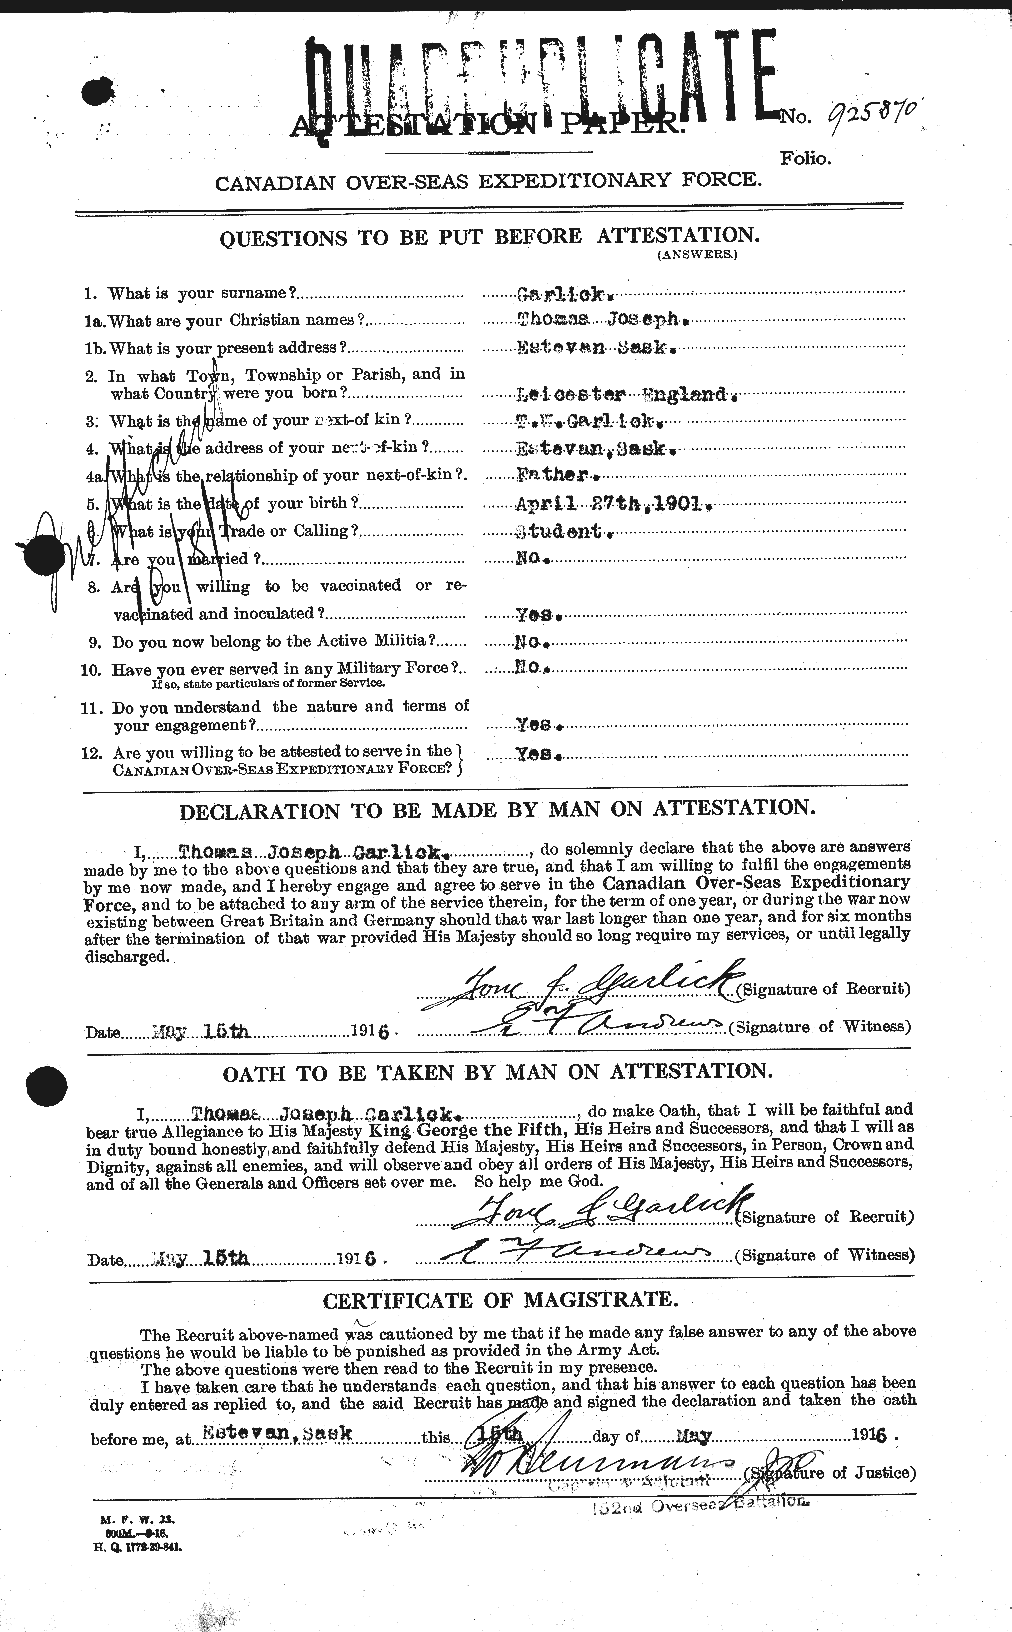 Personnel Records of the First World War - CEF 340677a